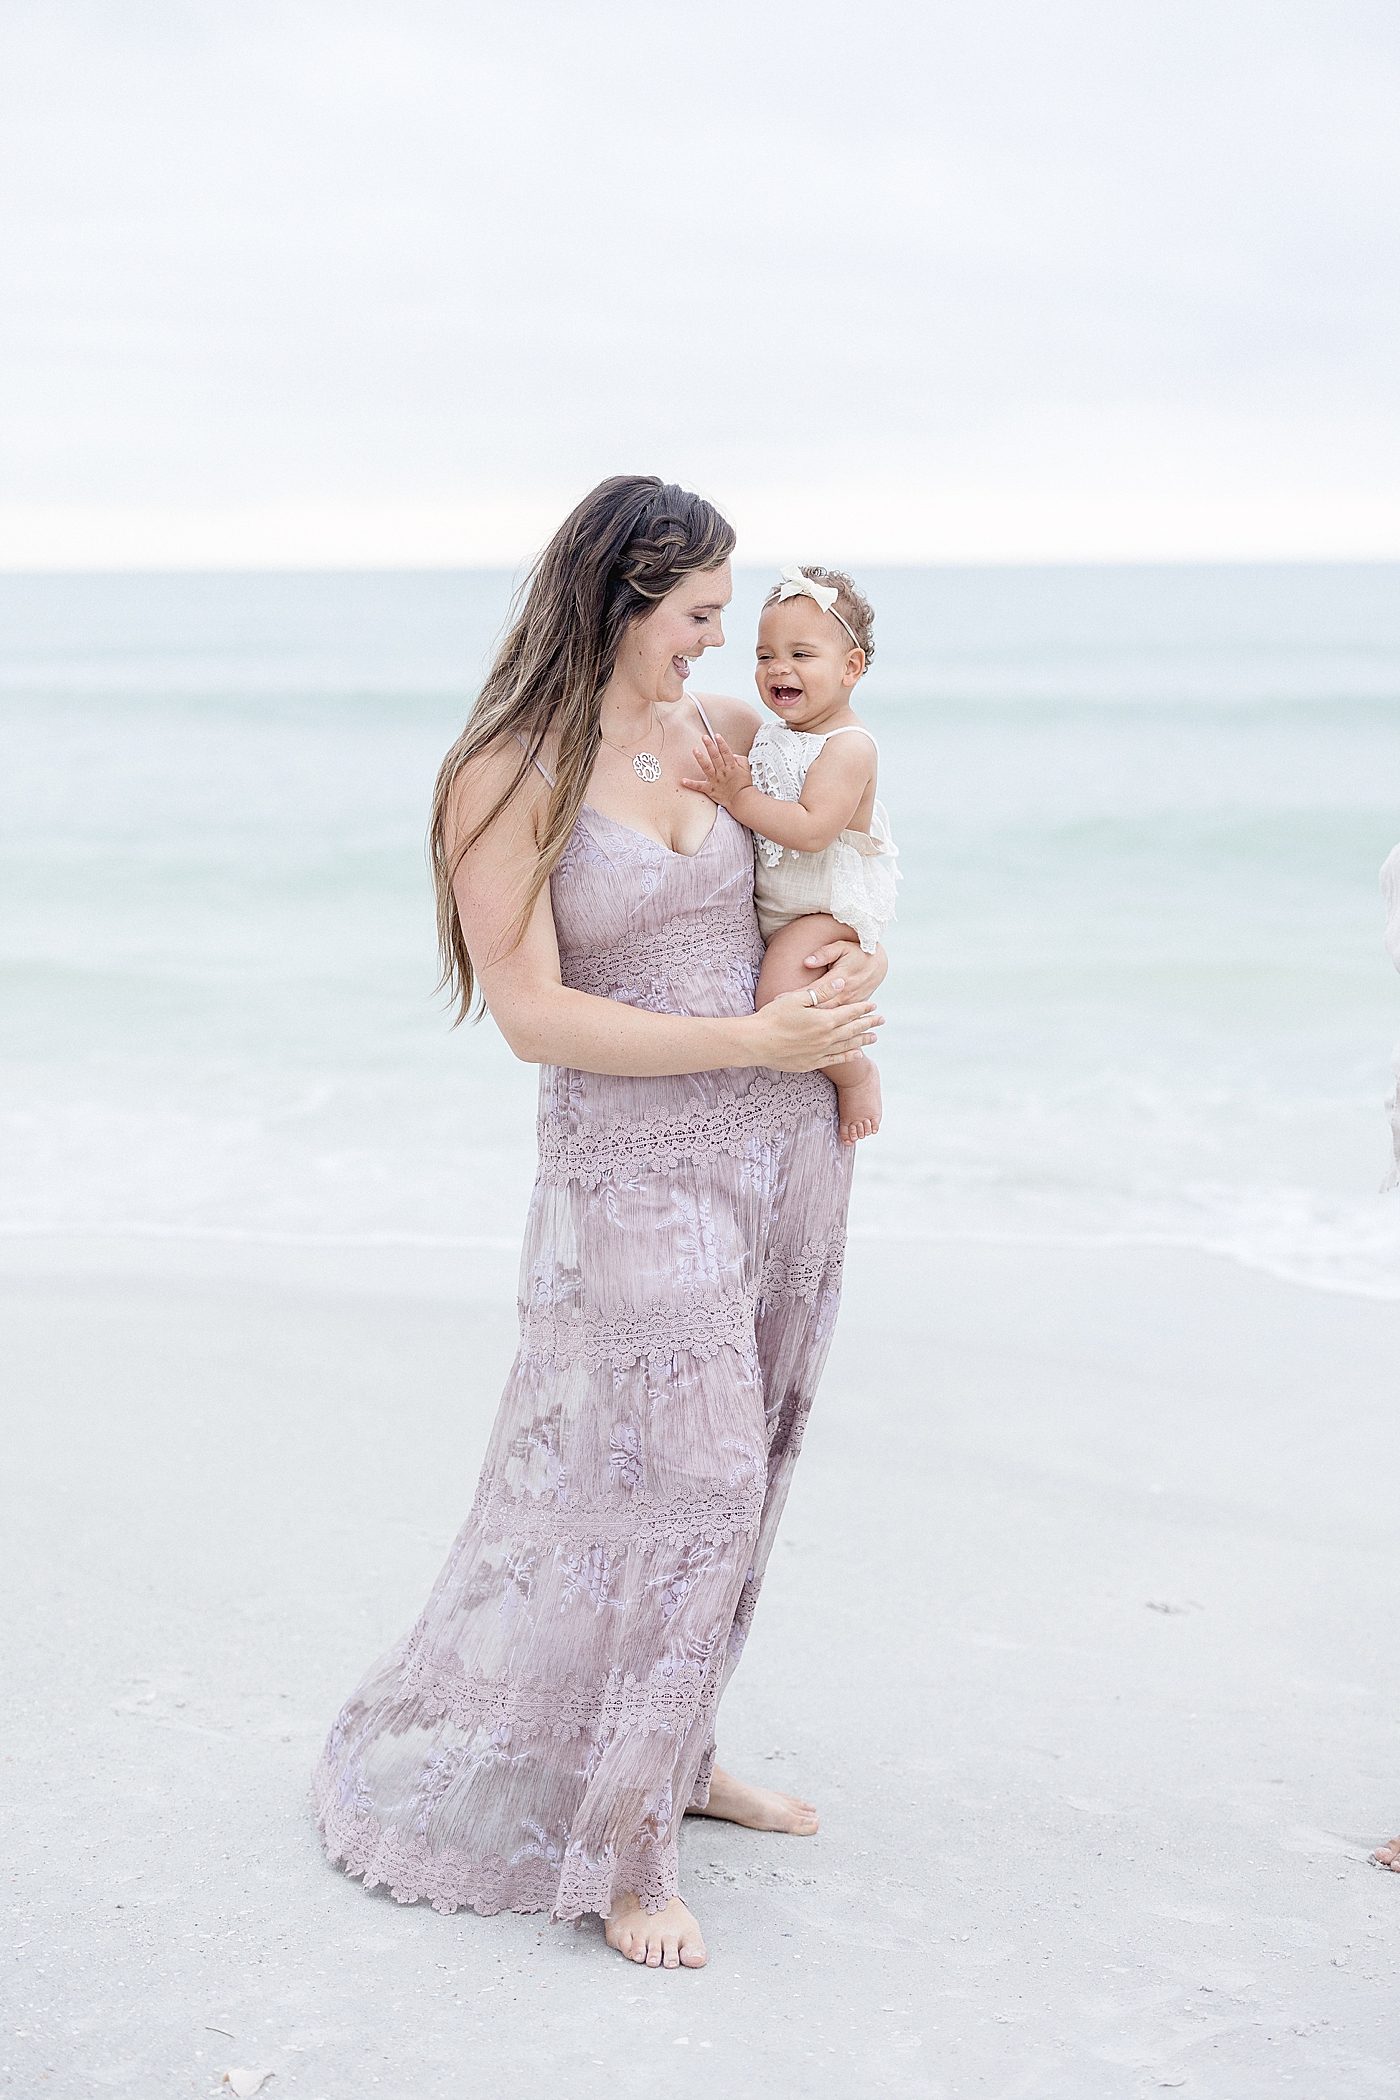 Mom and daughter by the water on St. Pete Beach. Photo by Brittany Elise Photography.